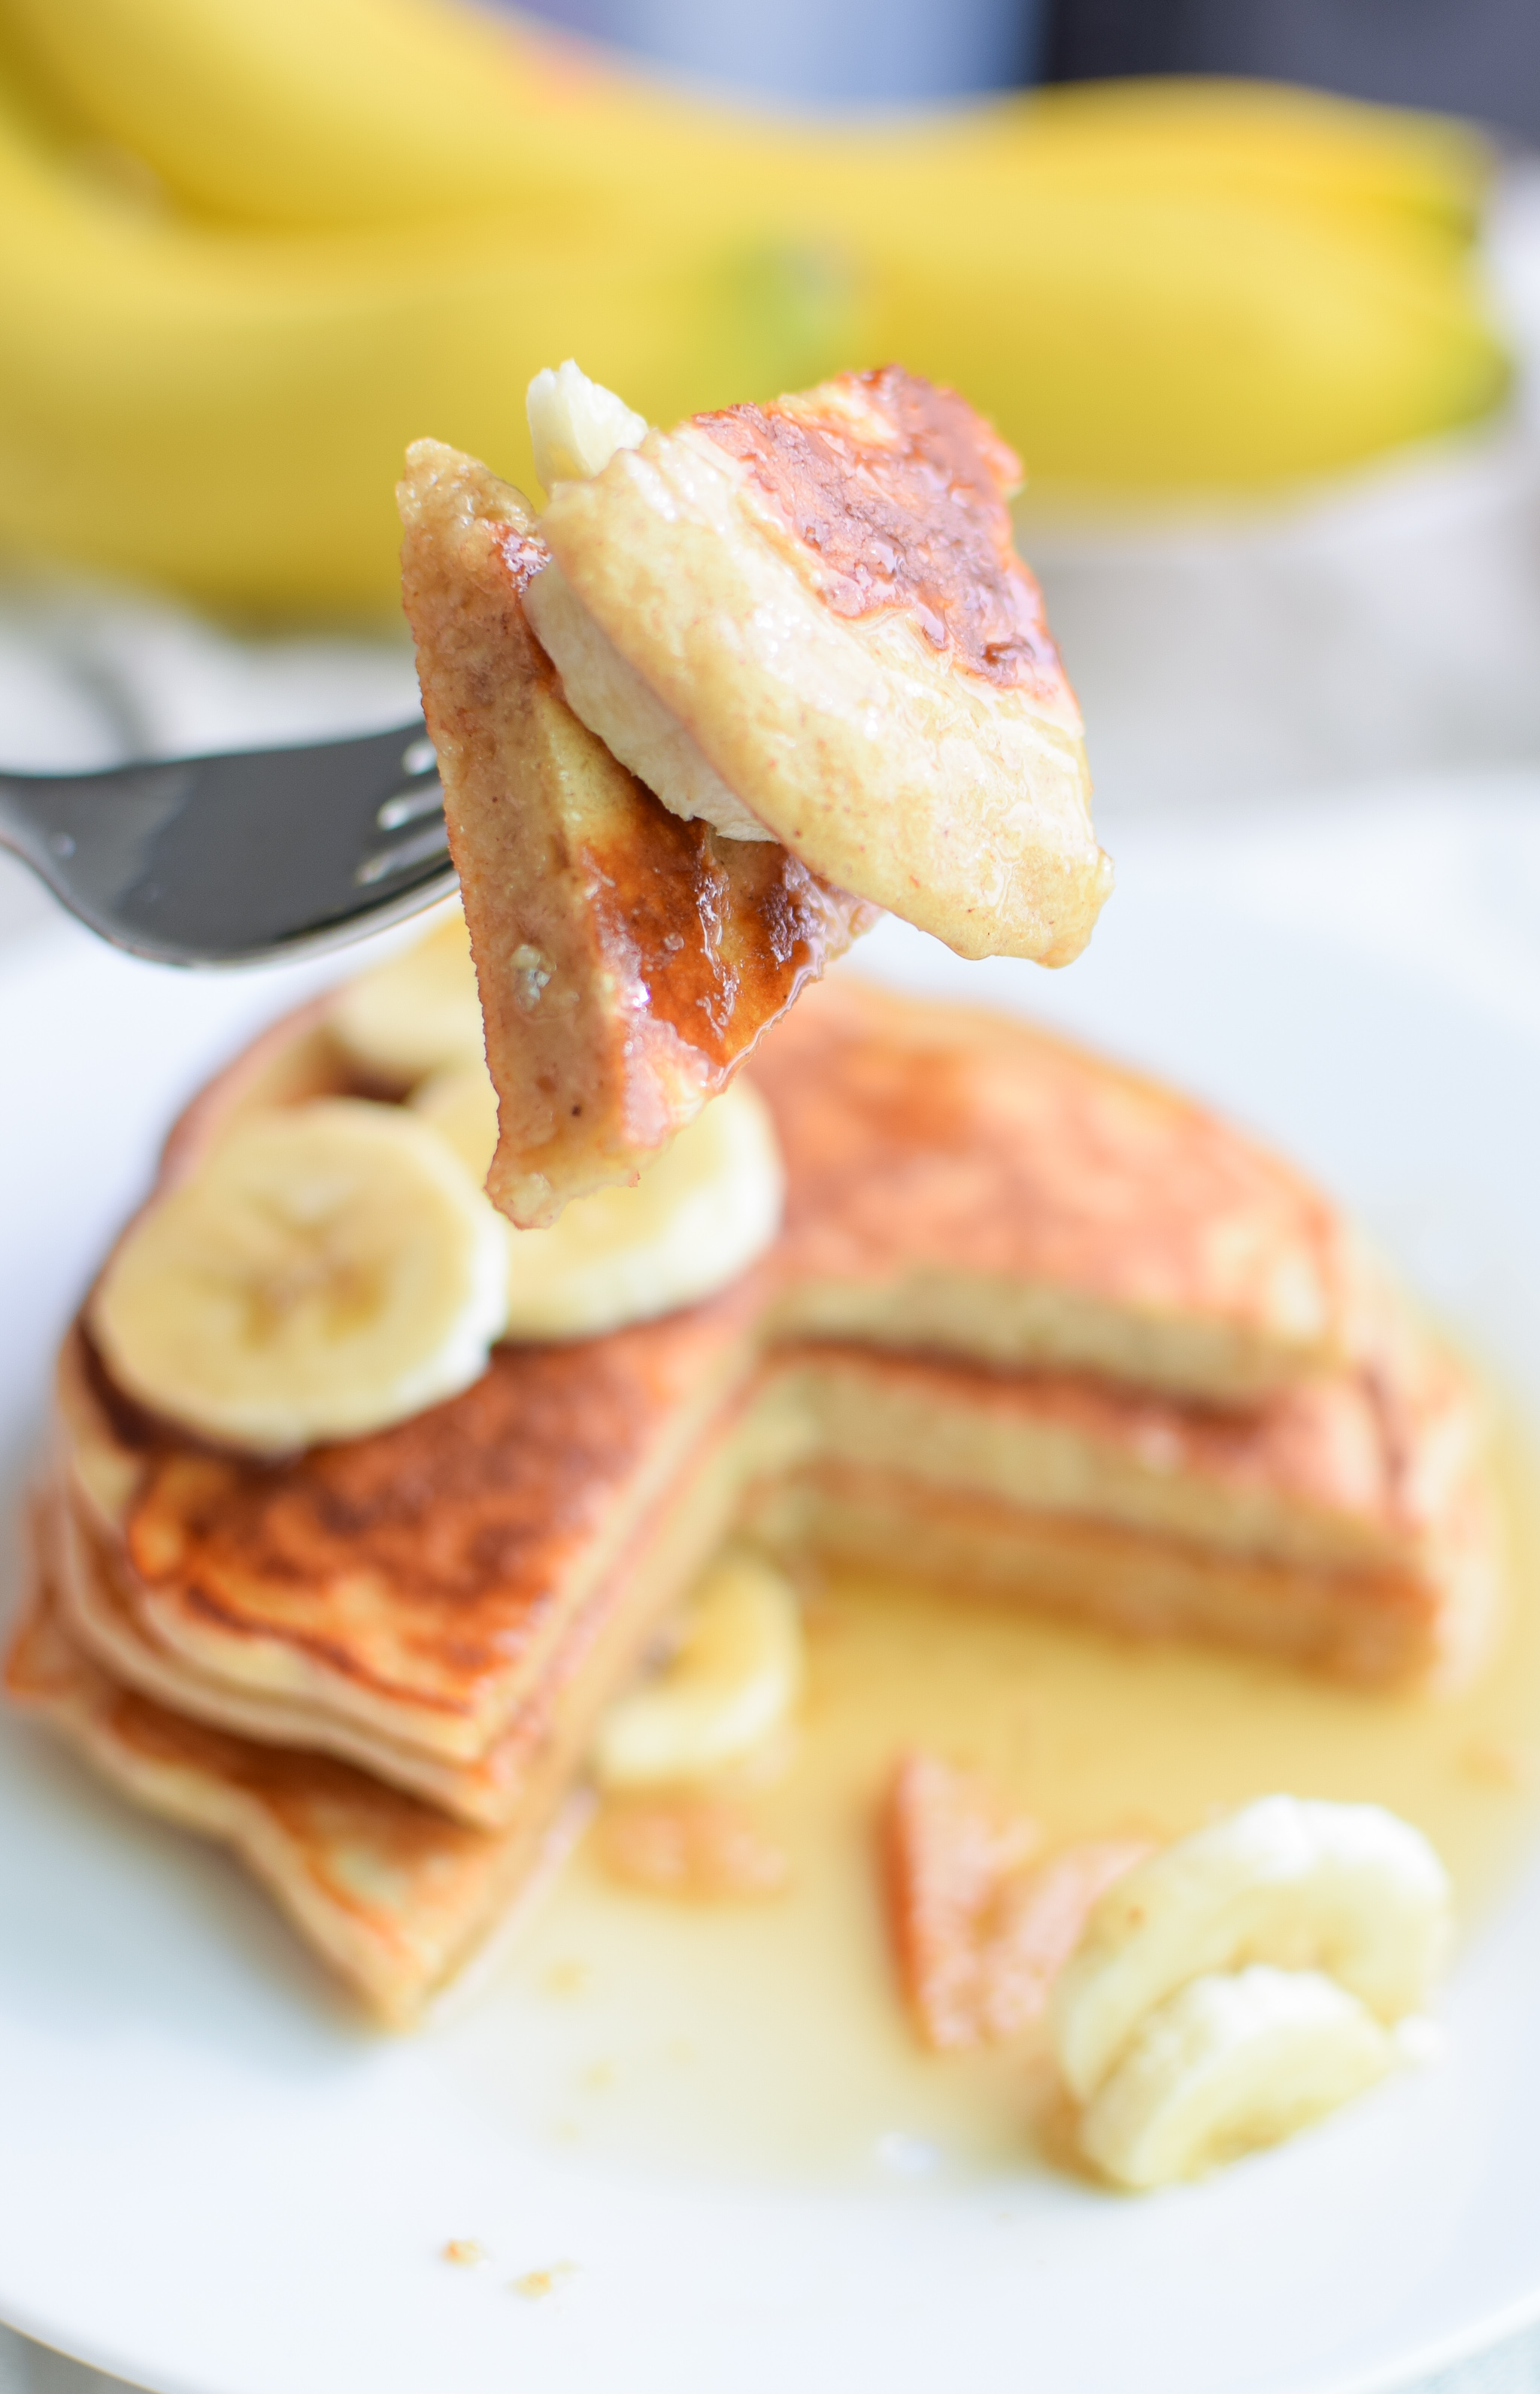 Banana Protein Pancakes Recipe - Delicious, healthy way to eat cake for breakfast! With a little extra protein :) - ProjectMealPlan.com